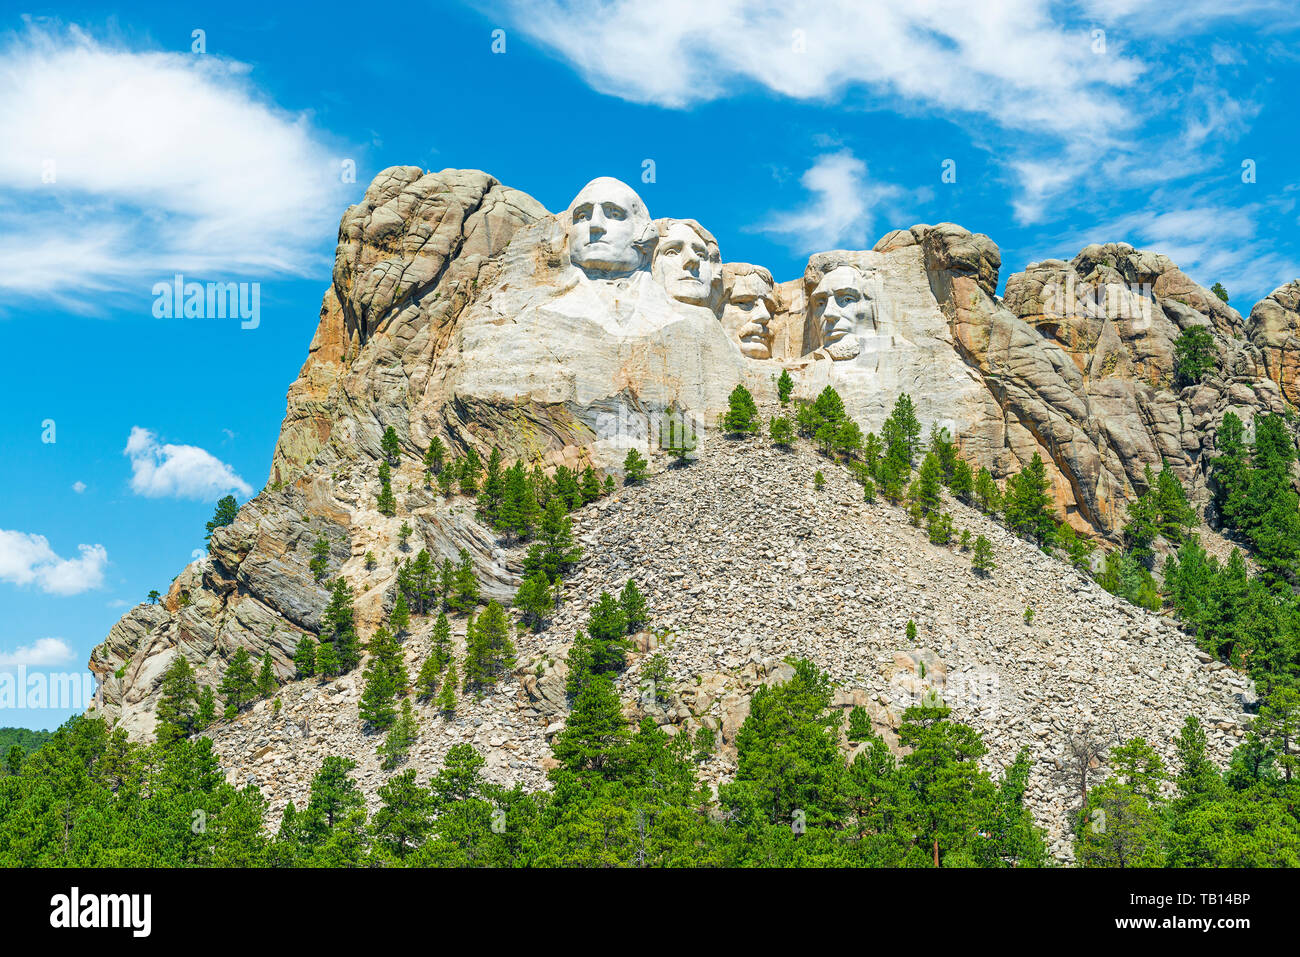 Mount Rushmore national monument with a pine tree forest in the Black Hills near Rapid City in South Dakota, United States of America, USA. Stock Photo